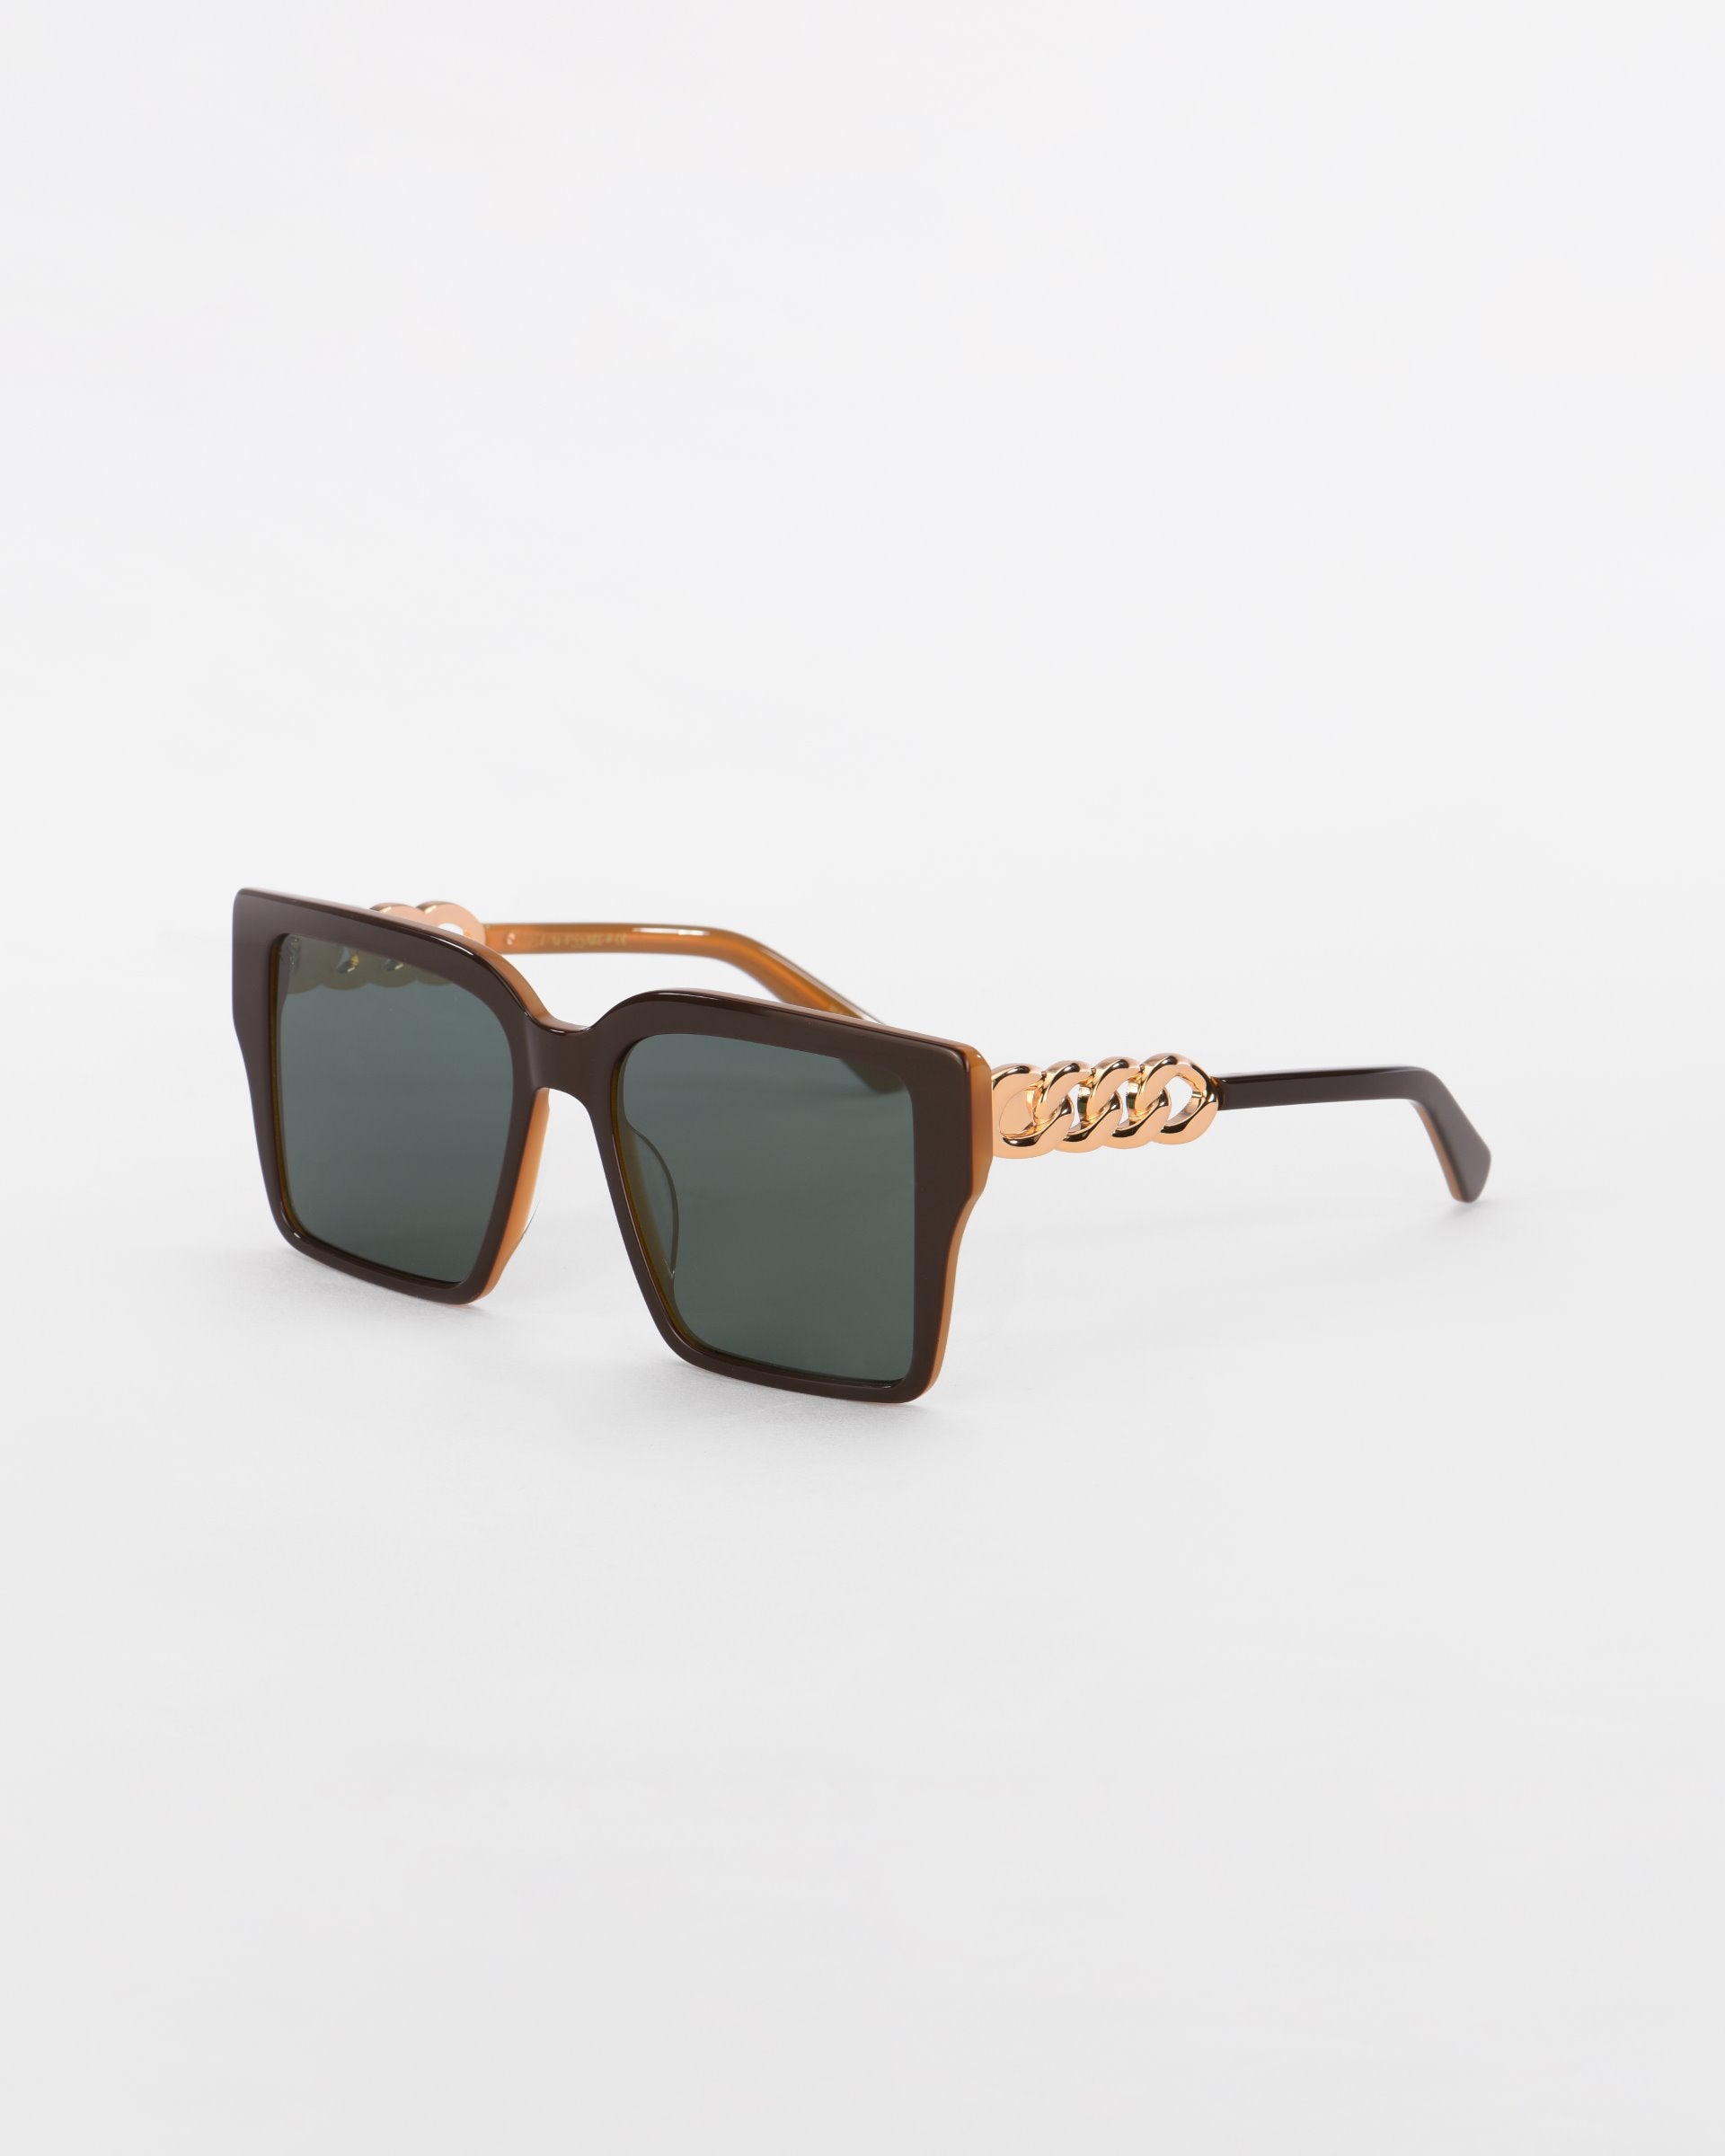 A pair of Castle sunglasses from For Art&#39;s Sake® with oversized square black lenses and thick brown gradient frames. The temples feature an 18-karat gold plated chain-link detail near the hinges, adding a touch of luxury. The background is a simple white.